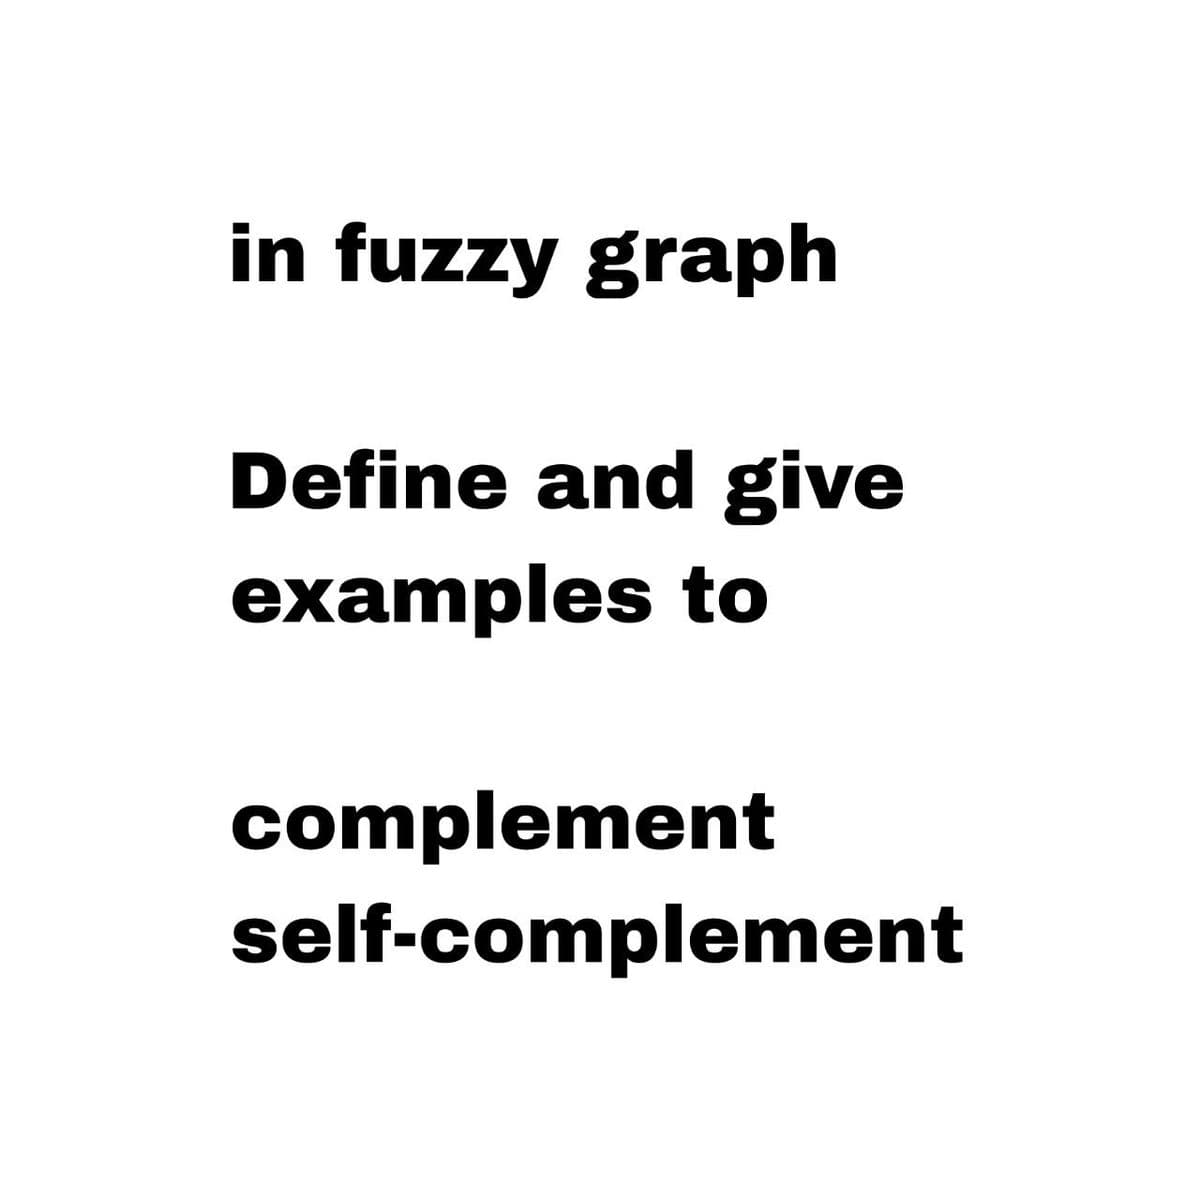 in fuzzy graph
Define and give
examples to
complement
self-complement